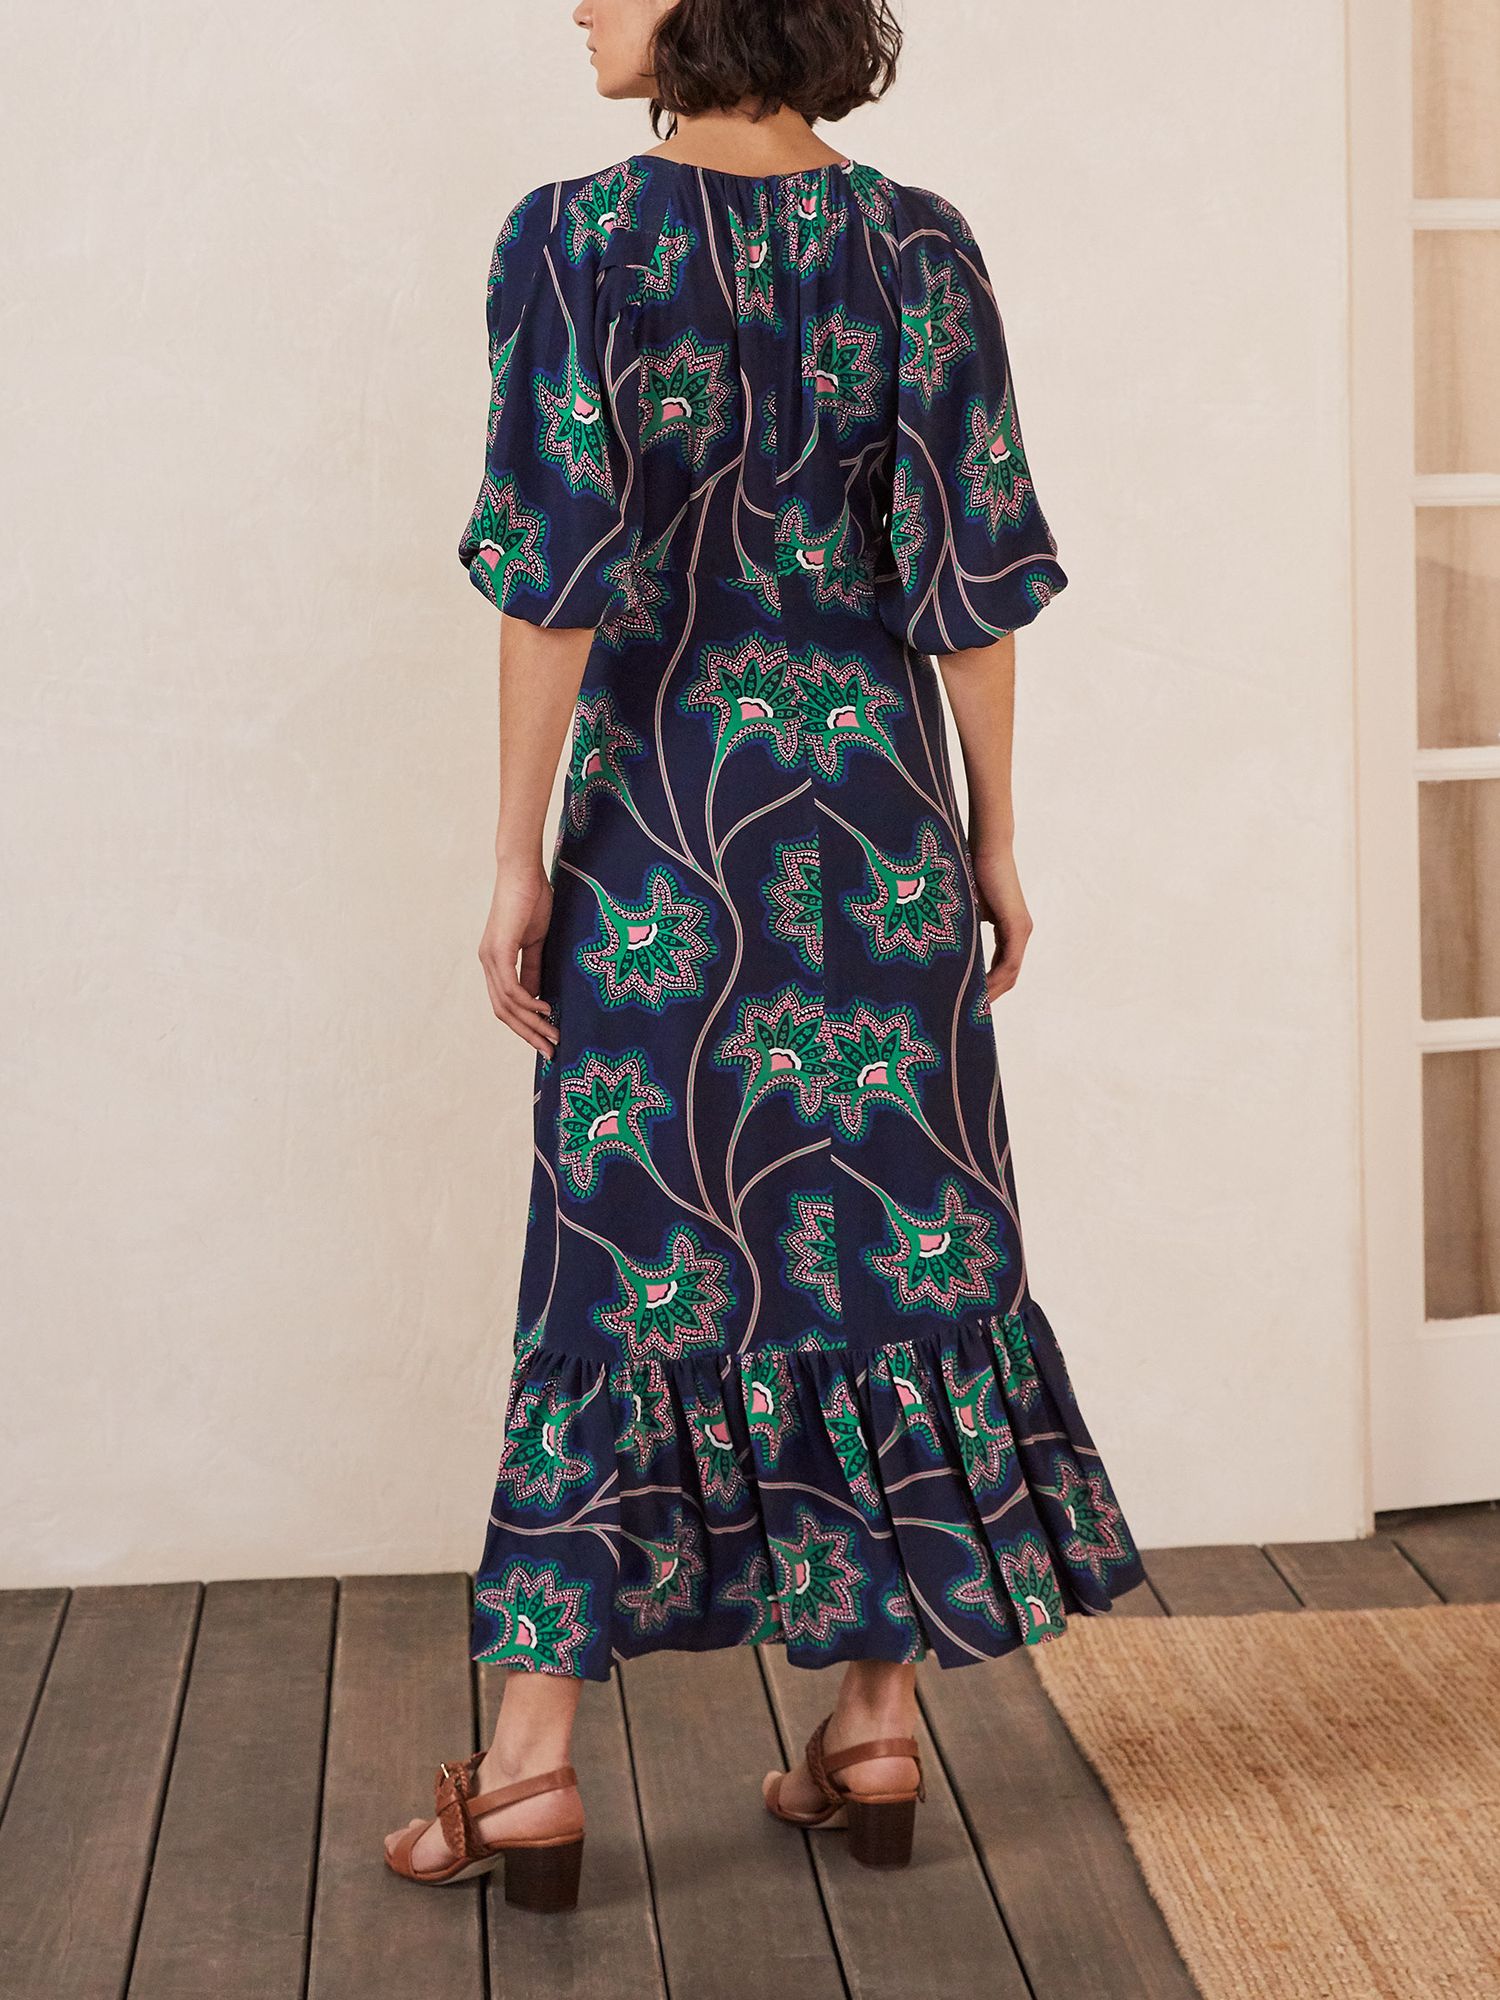 Boden Claire Floral Tiered Hem Maxi Dress, Navy at John Lewis & Partners